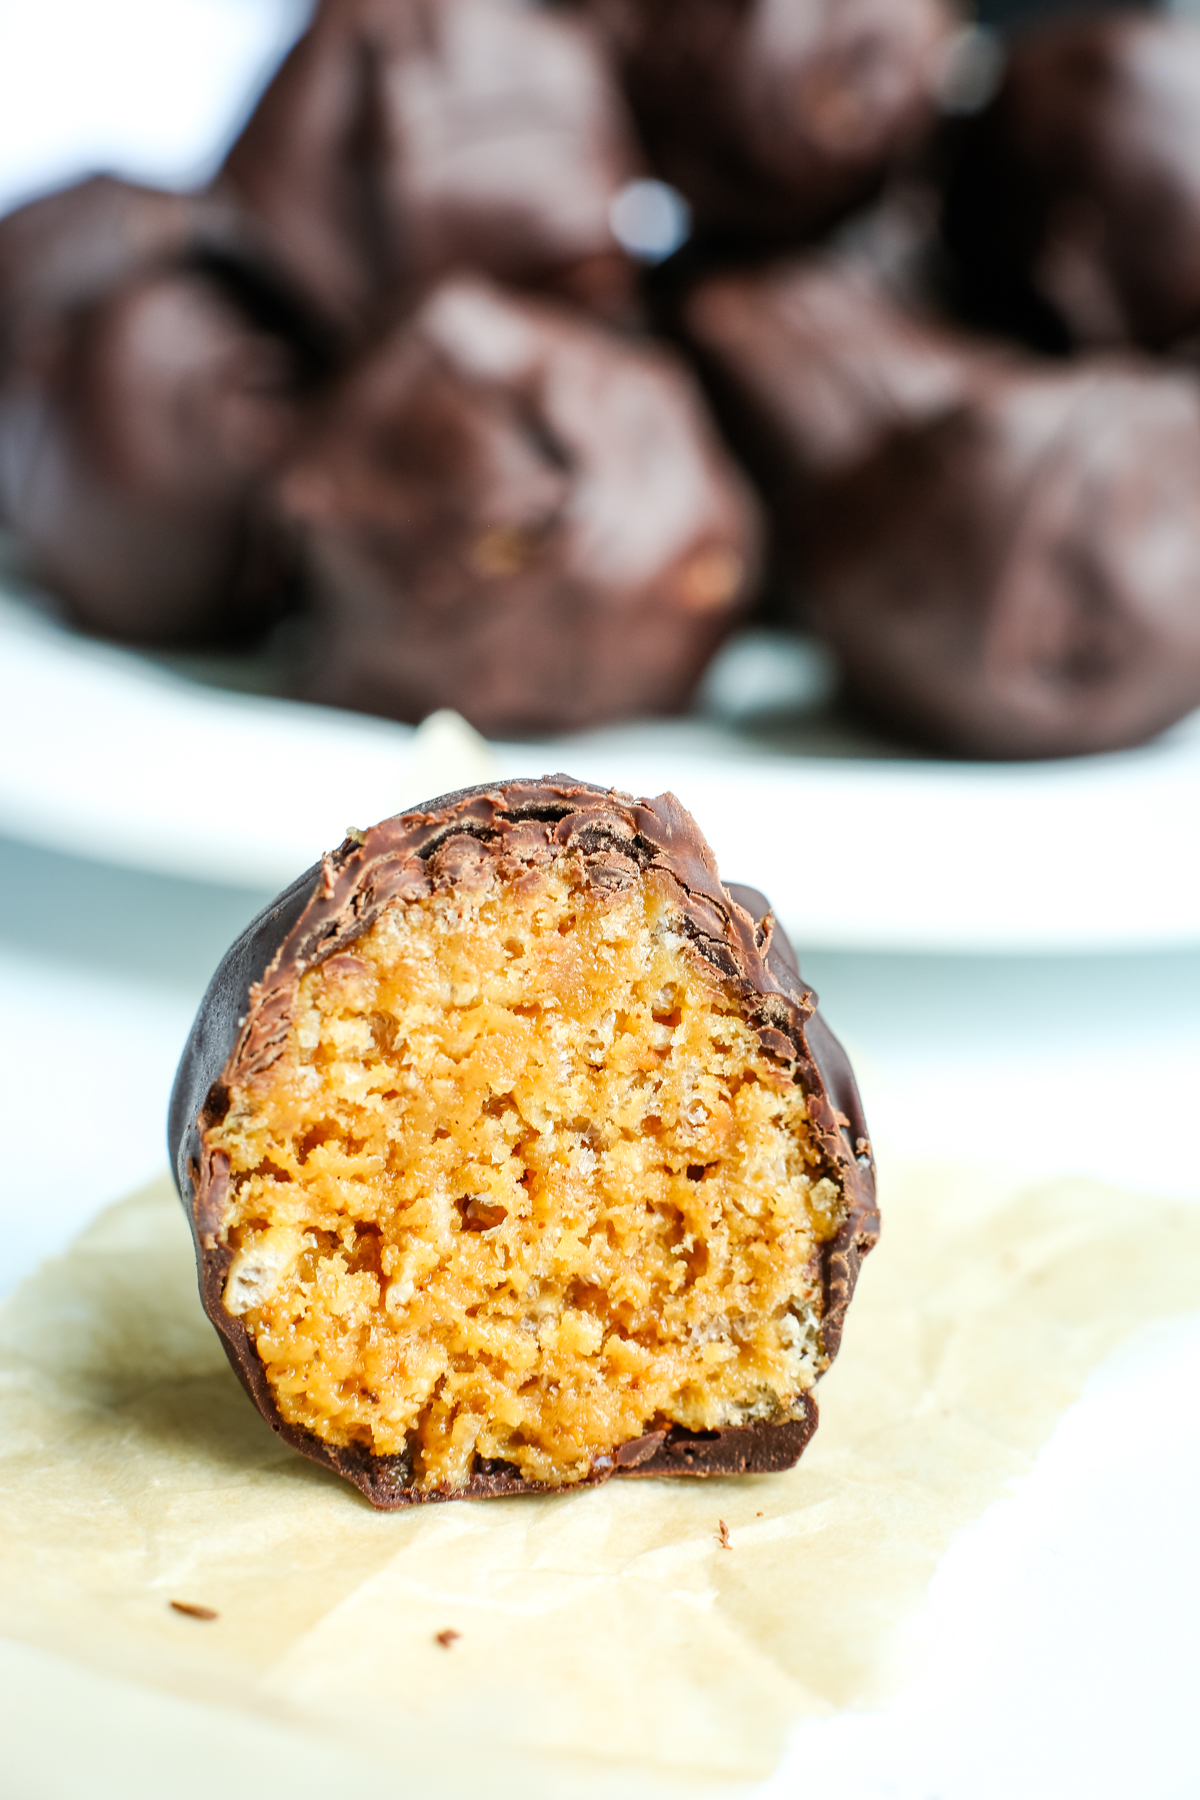 the inside of one of the peanut butter balls with Rice Krispies